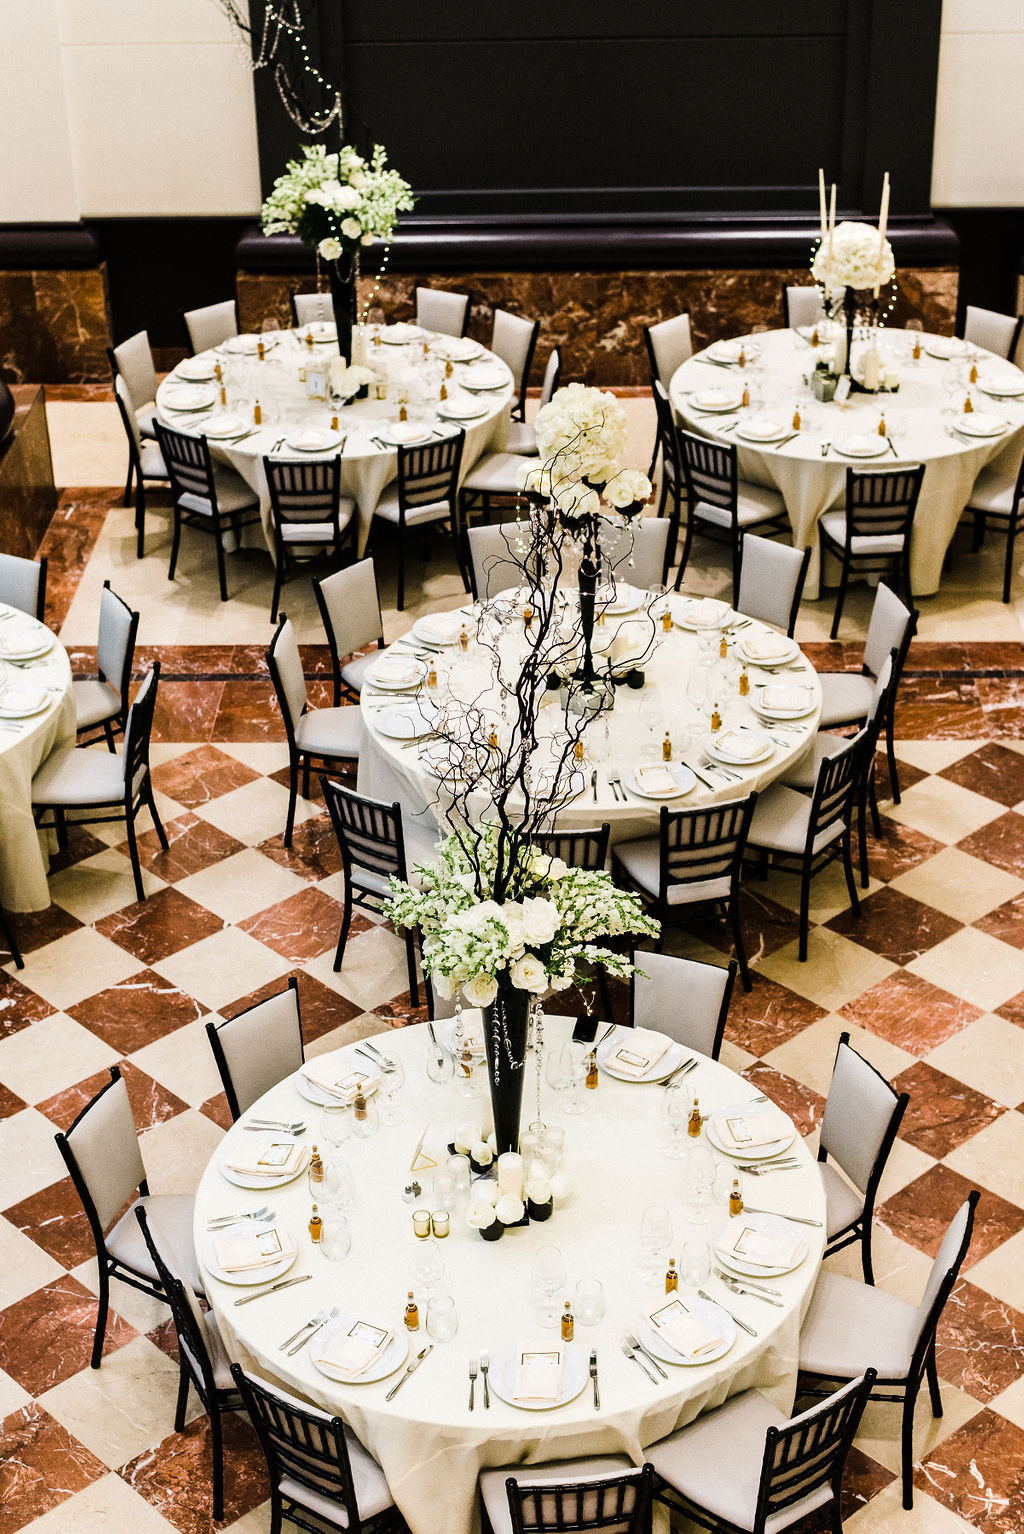 The Goodwin Hotel and Porron &amp; Pina put on a wedding of a life time with a intimate floor plan designed with round tables - Pearl Weddings &amp; Events